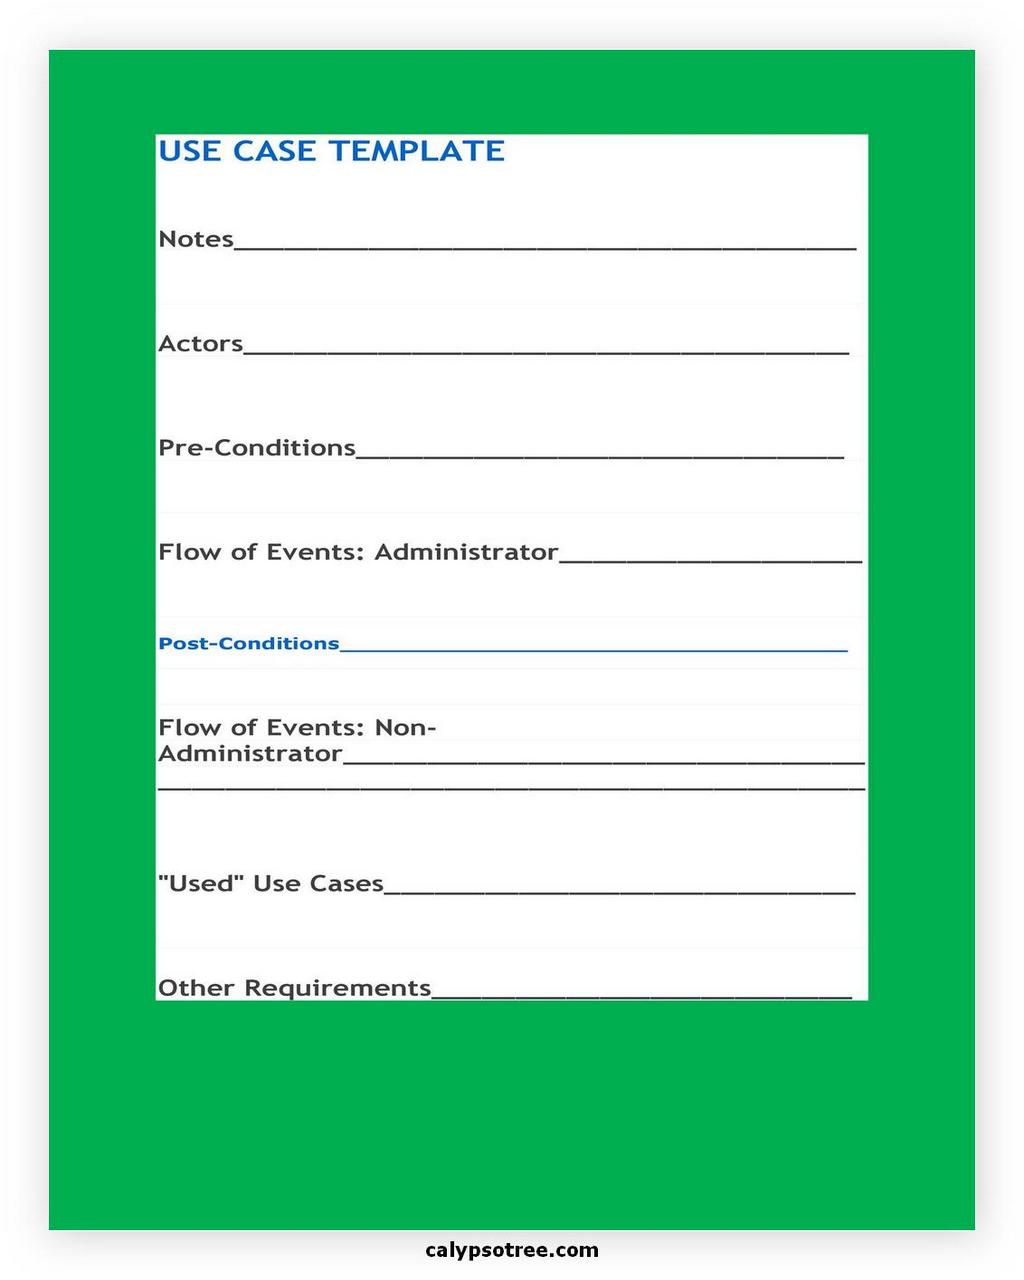 use case template excel 08